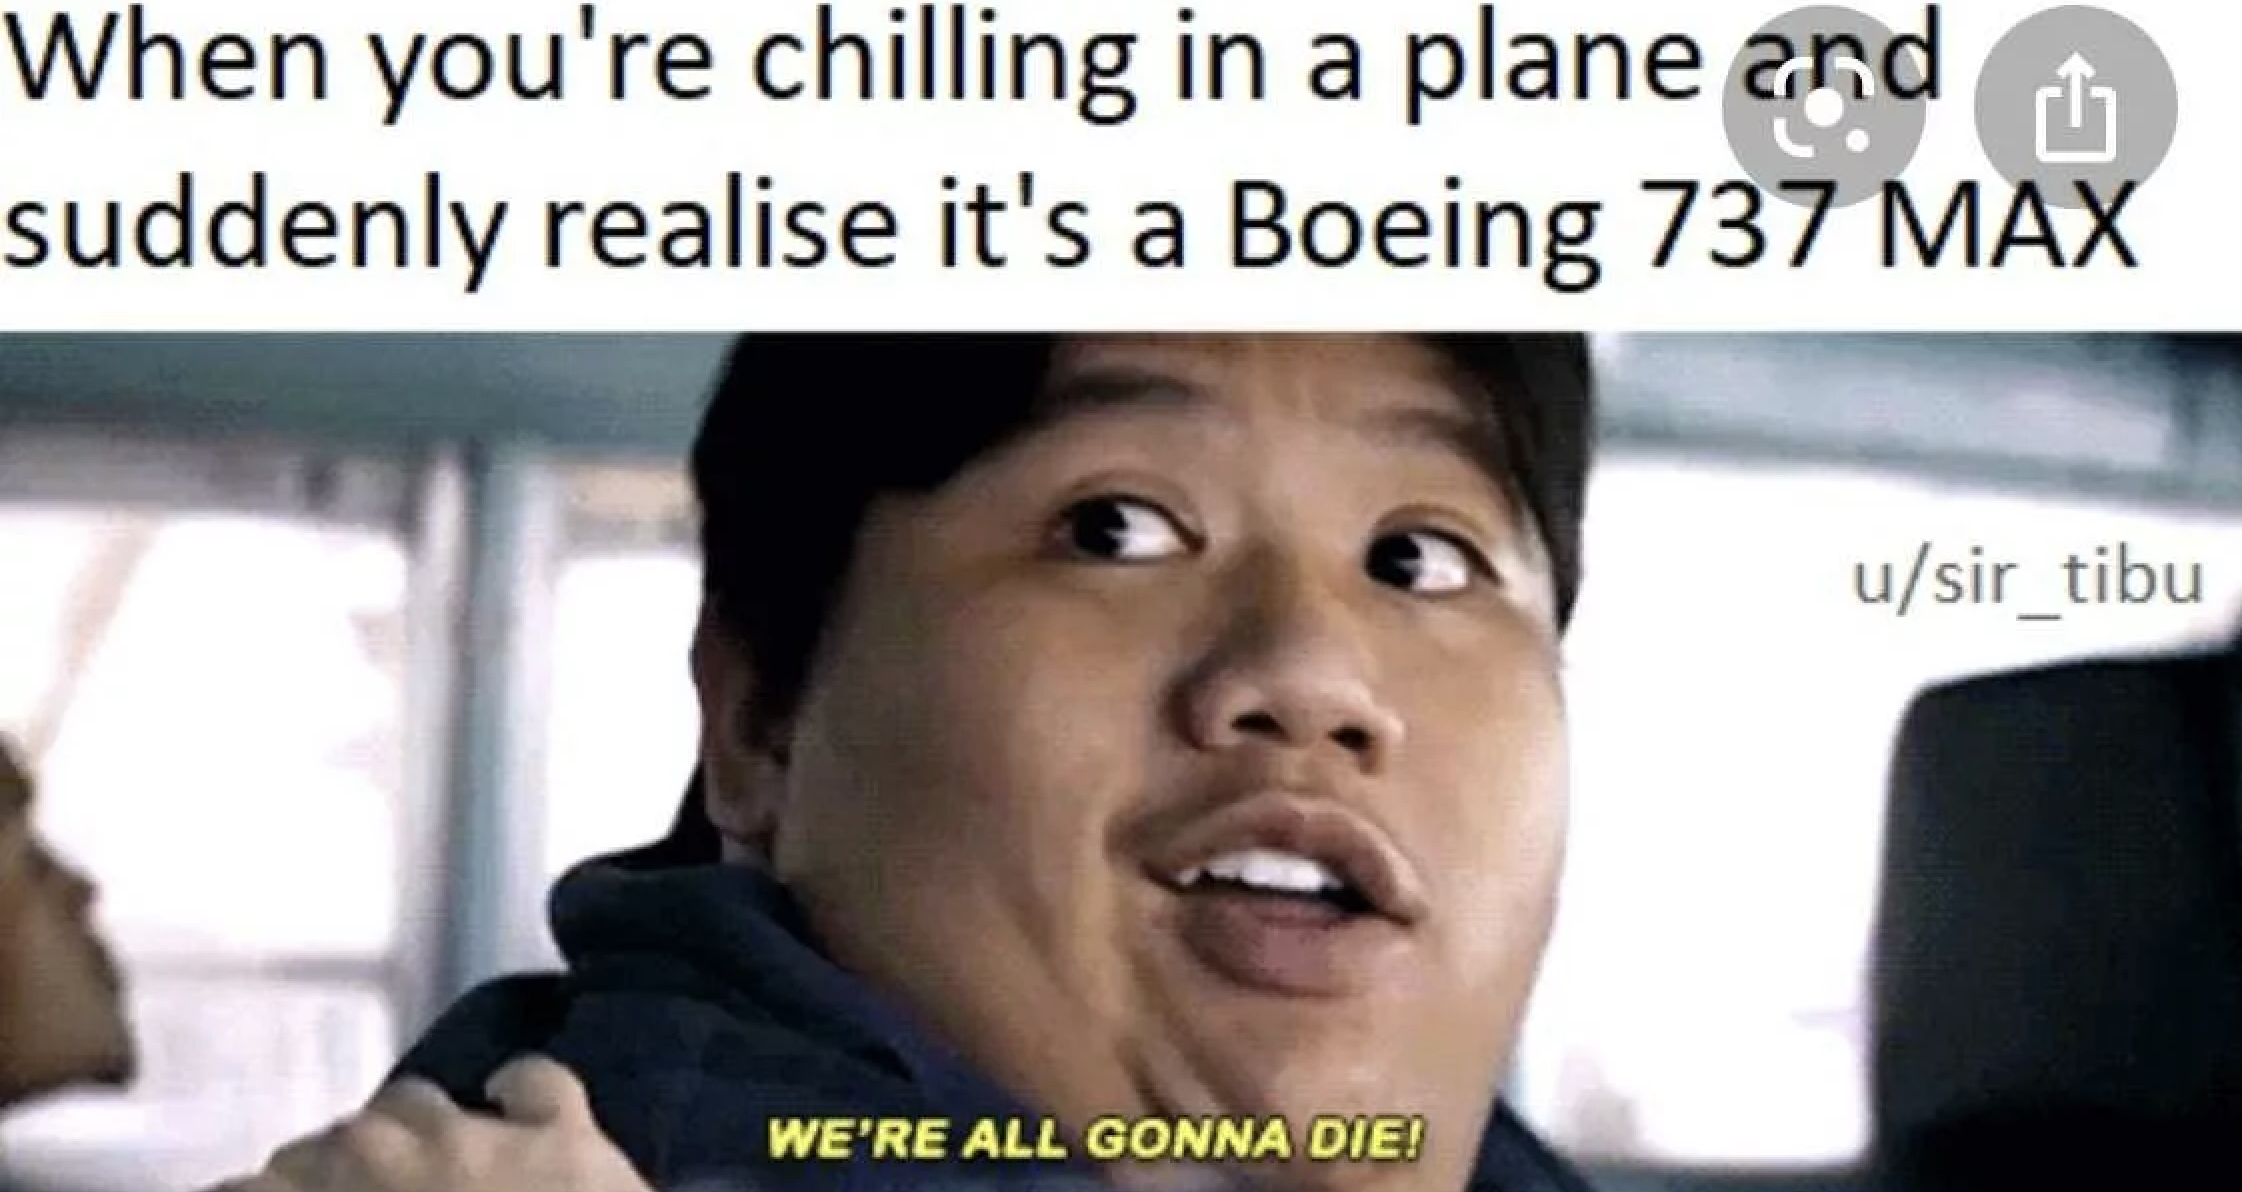 photo caption - When you're chilling in a plane and suddenly realise it's a Boeing 737 Max We'Re All Gonna Die! usir_tibu